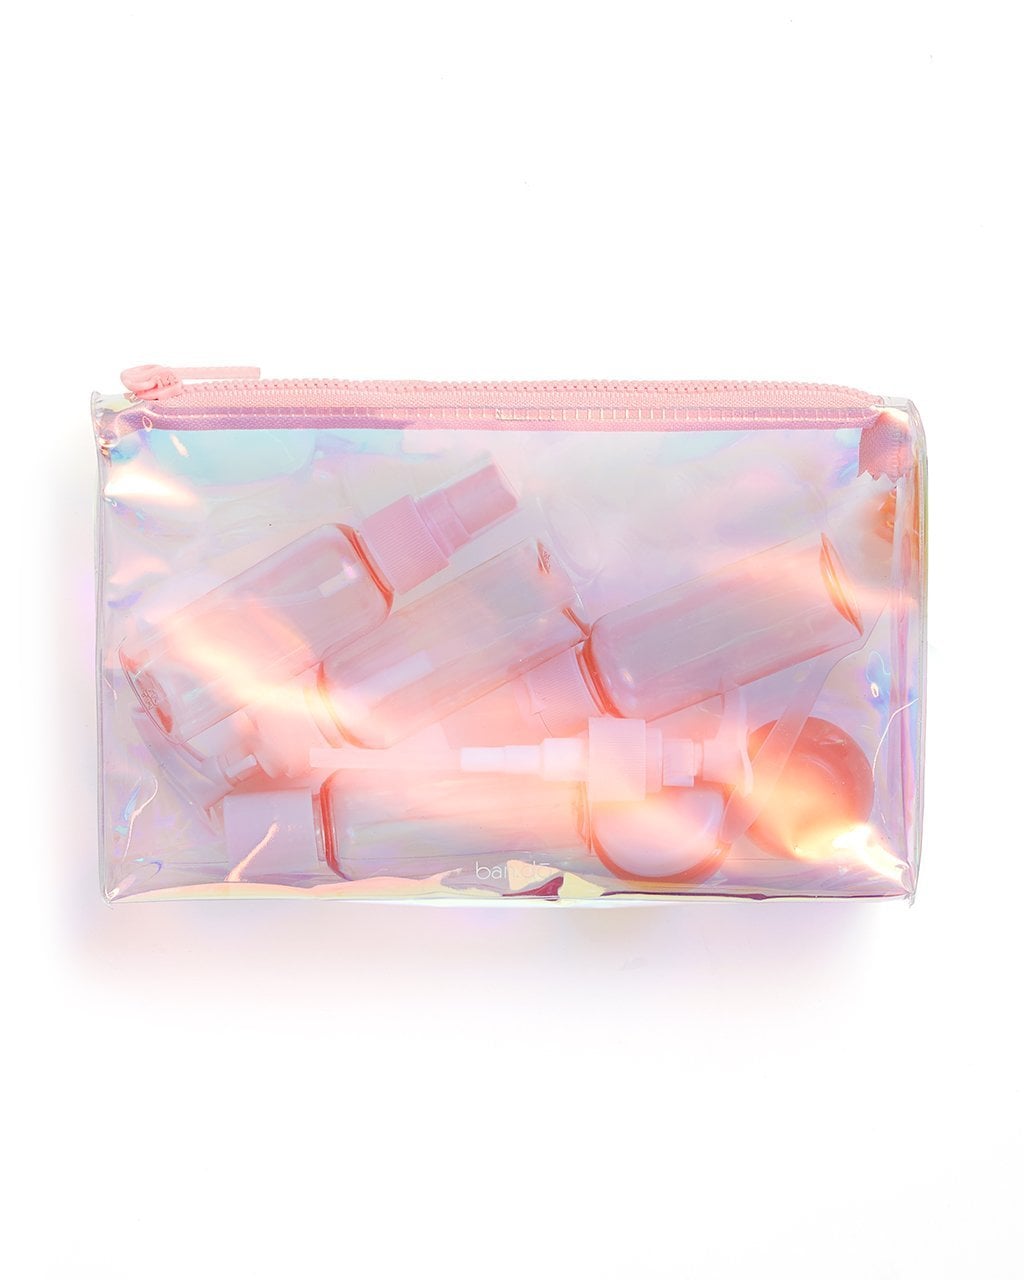 Best Clear Cosmetic Bags for Travel